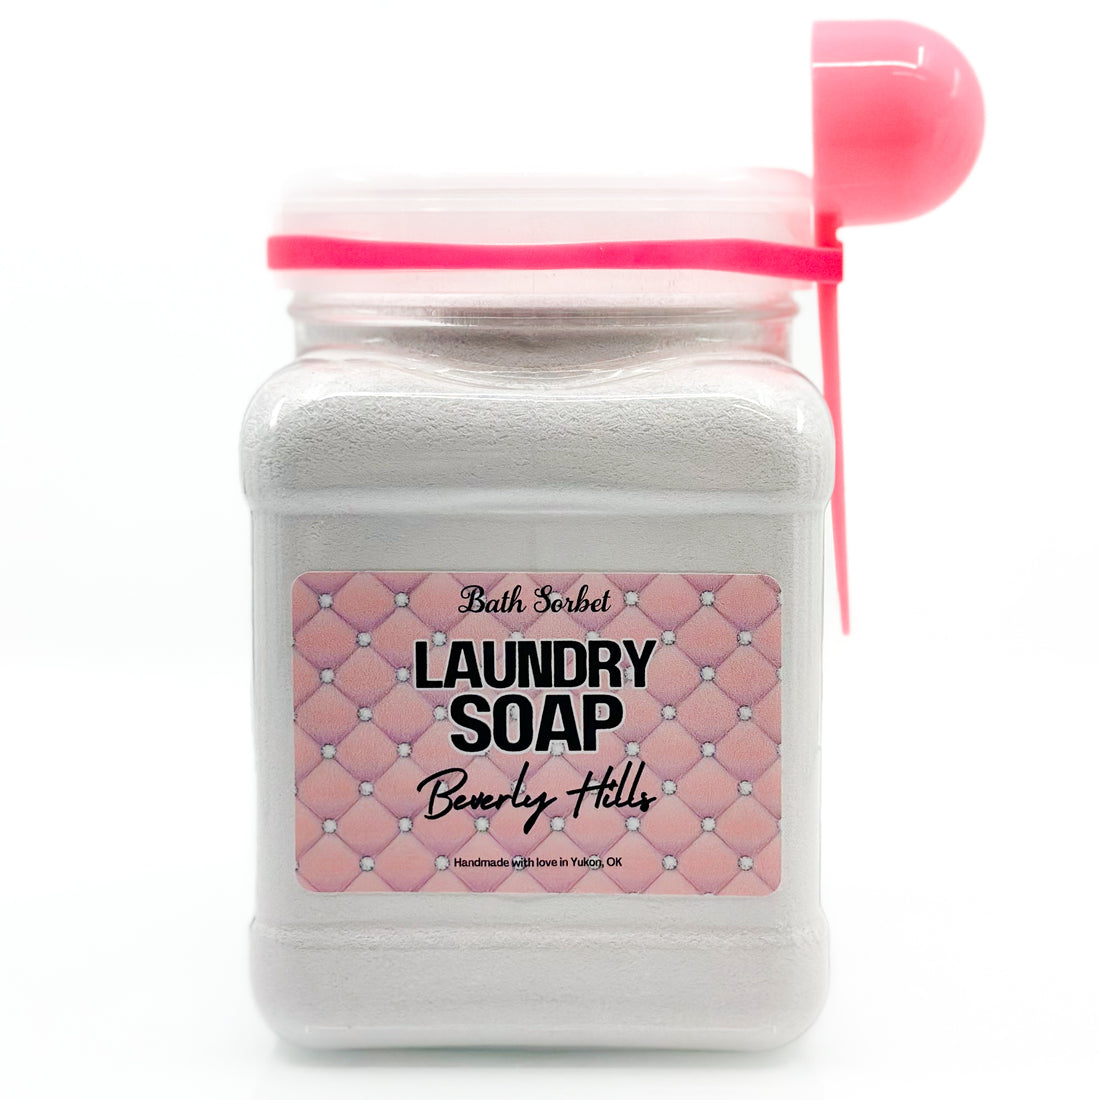 Beverly Hills Laundry Soap